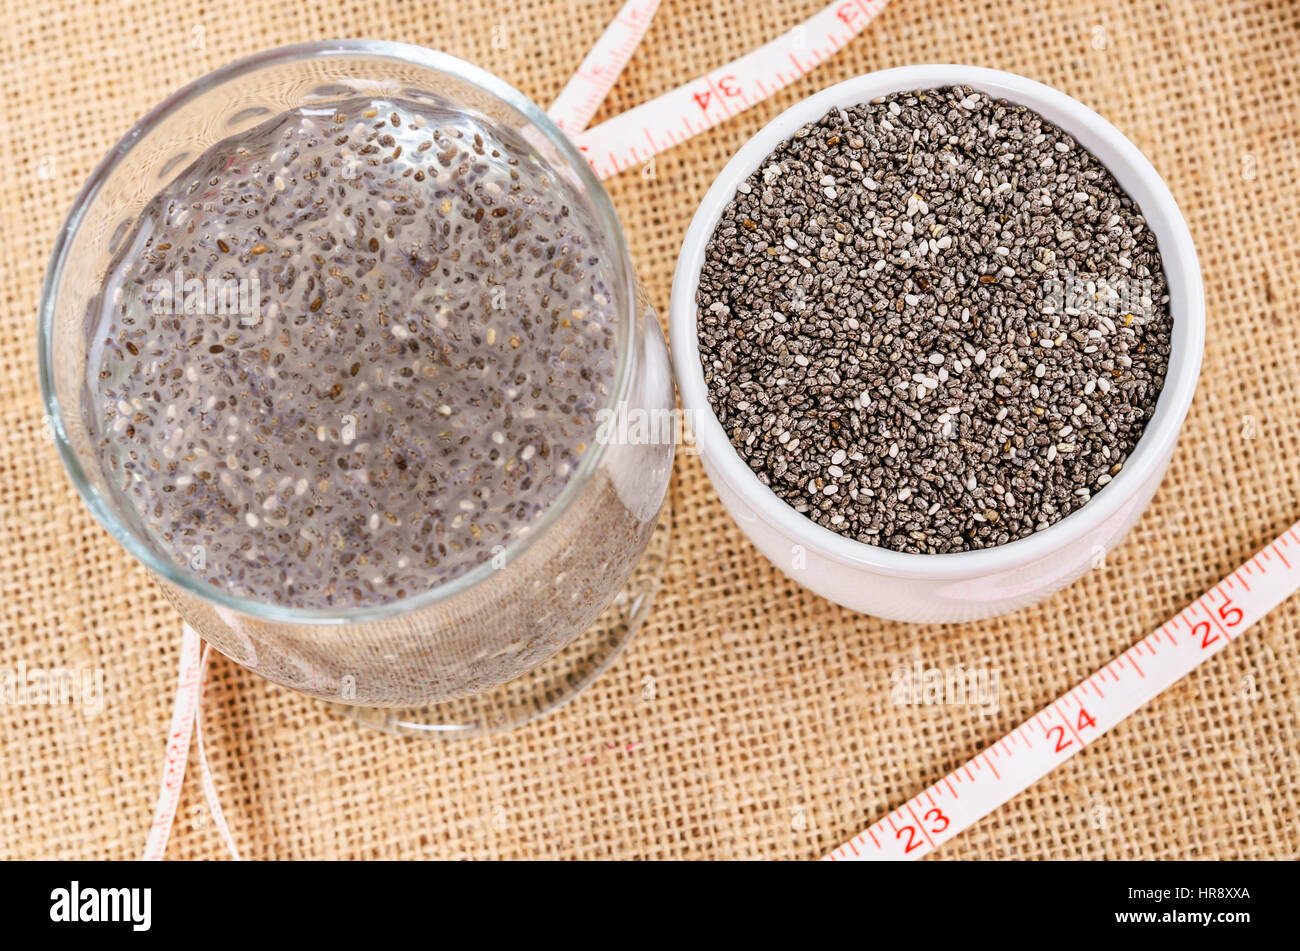 Healthy Chia seeds in white cup and soak in water with measuring tape on  sack background, Healthy food concept Stock Photo - Alamy